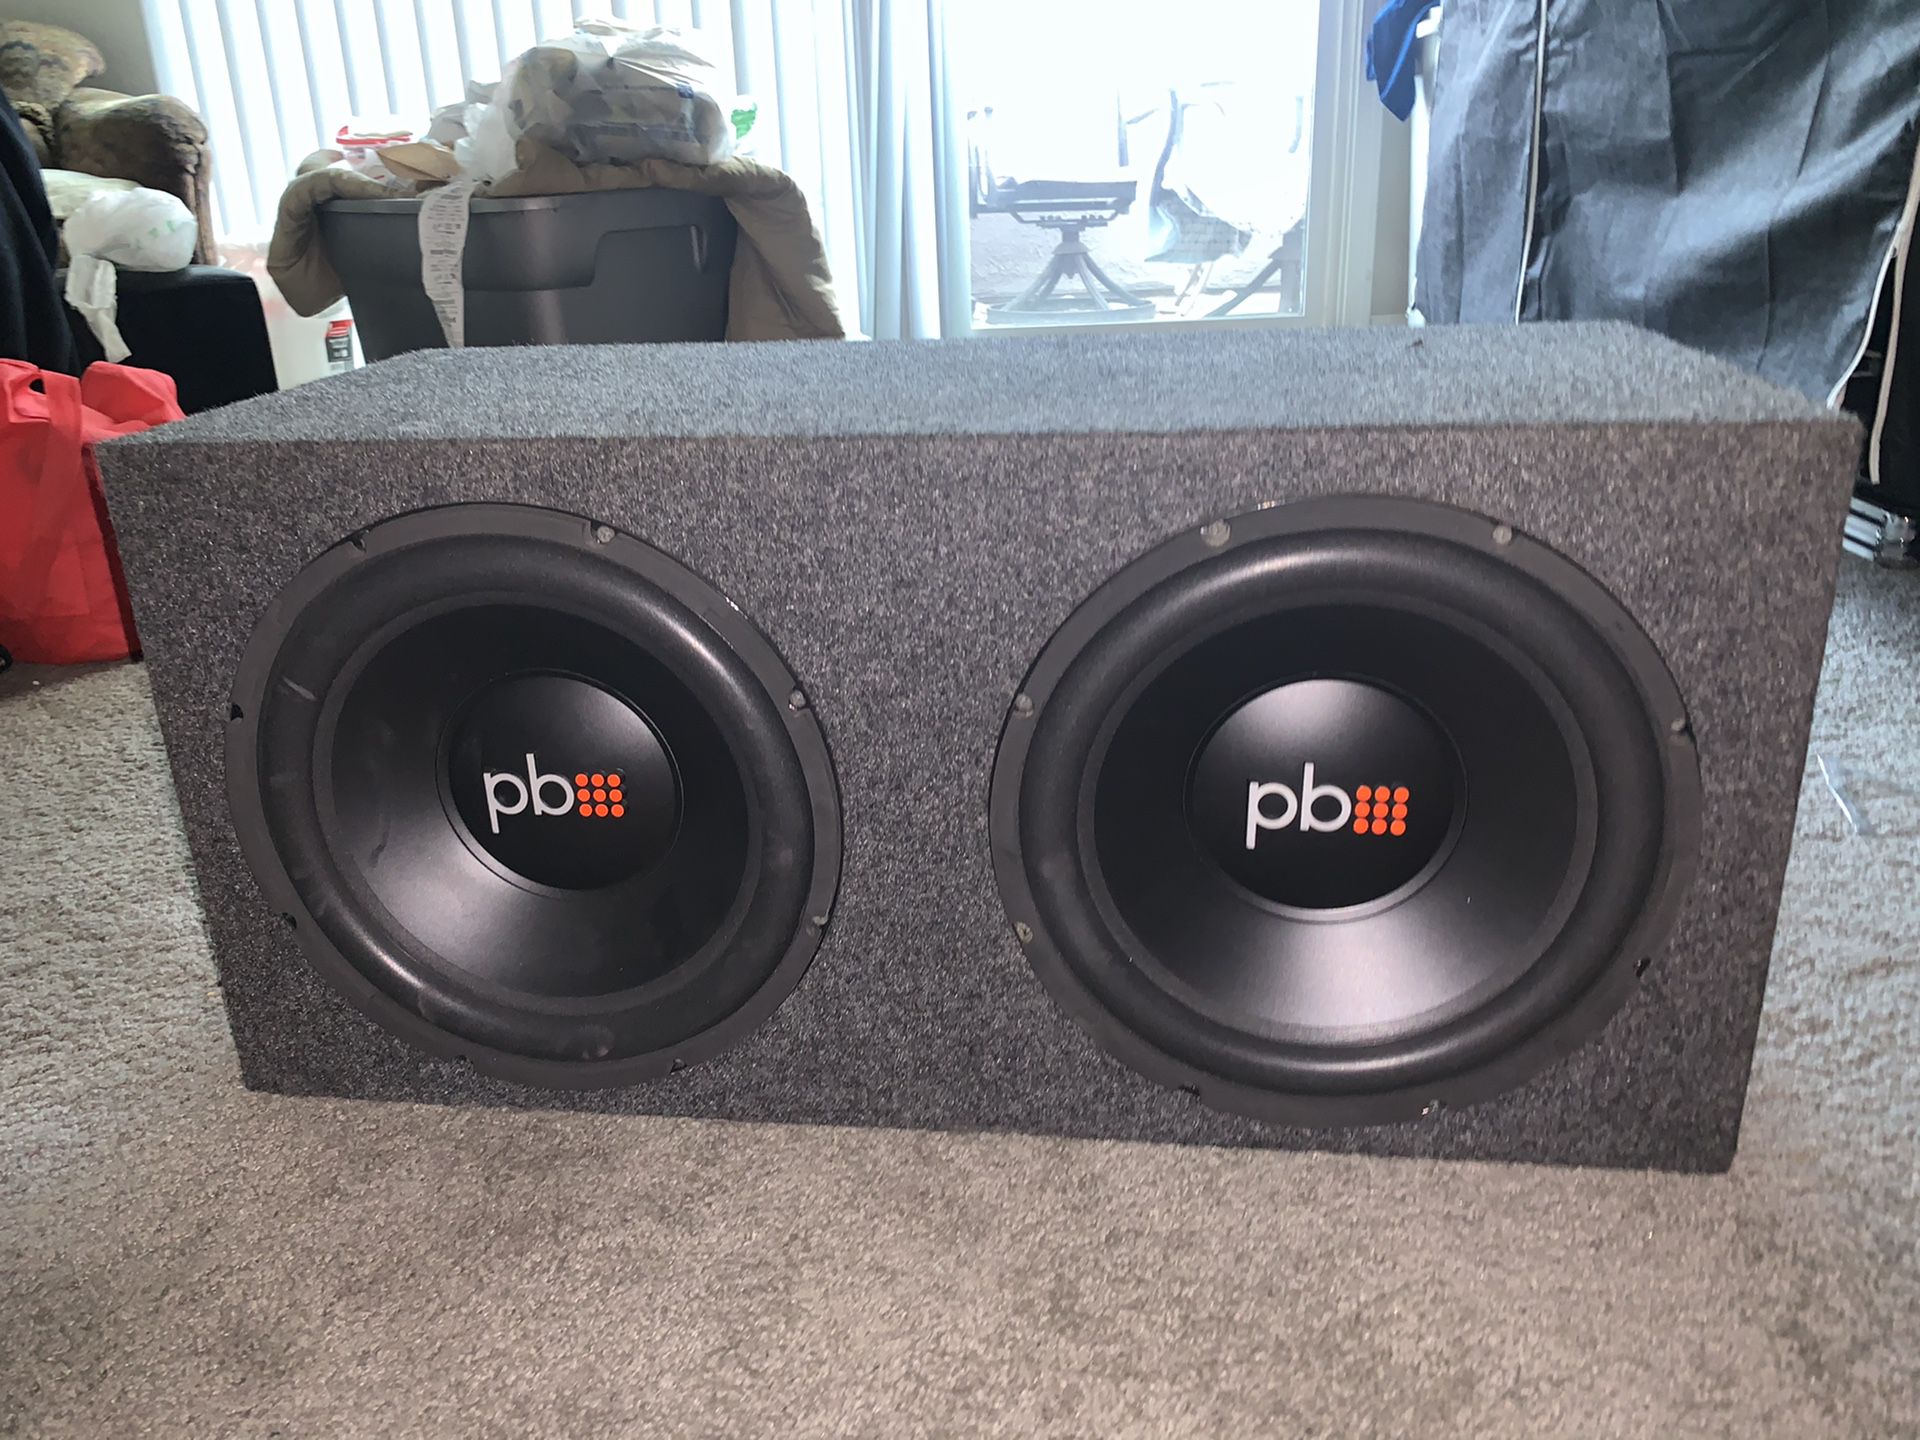 PowerBass 12 in subs with 3000 watt amp